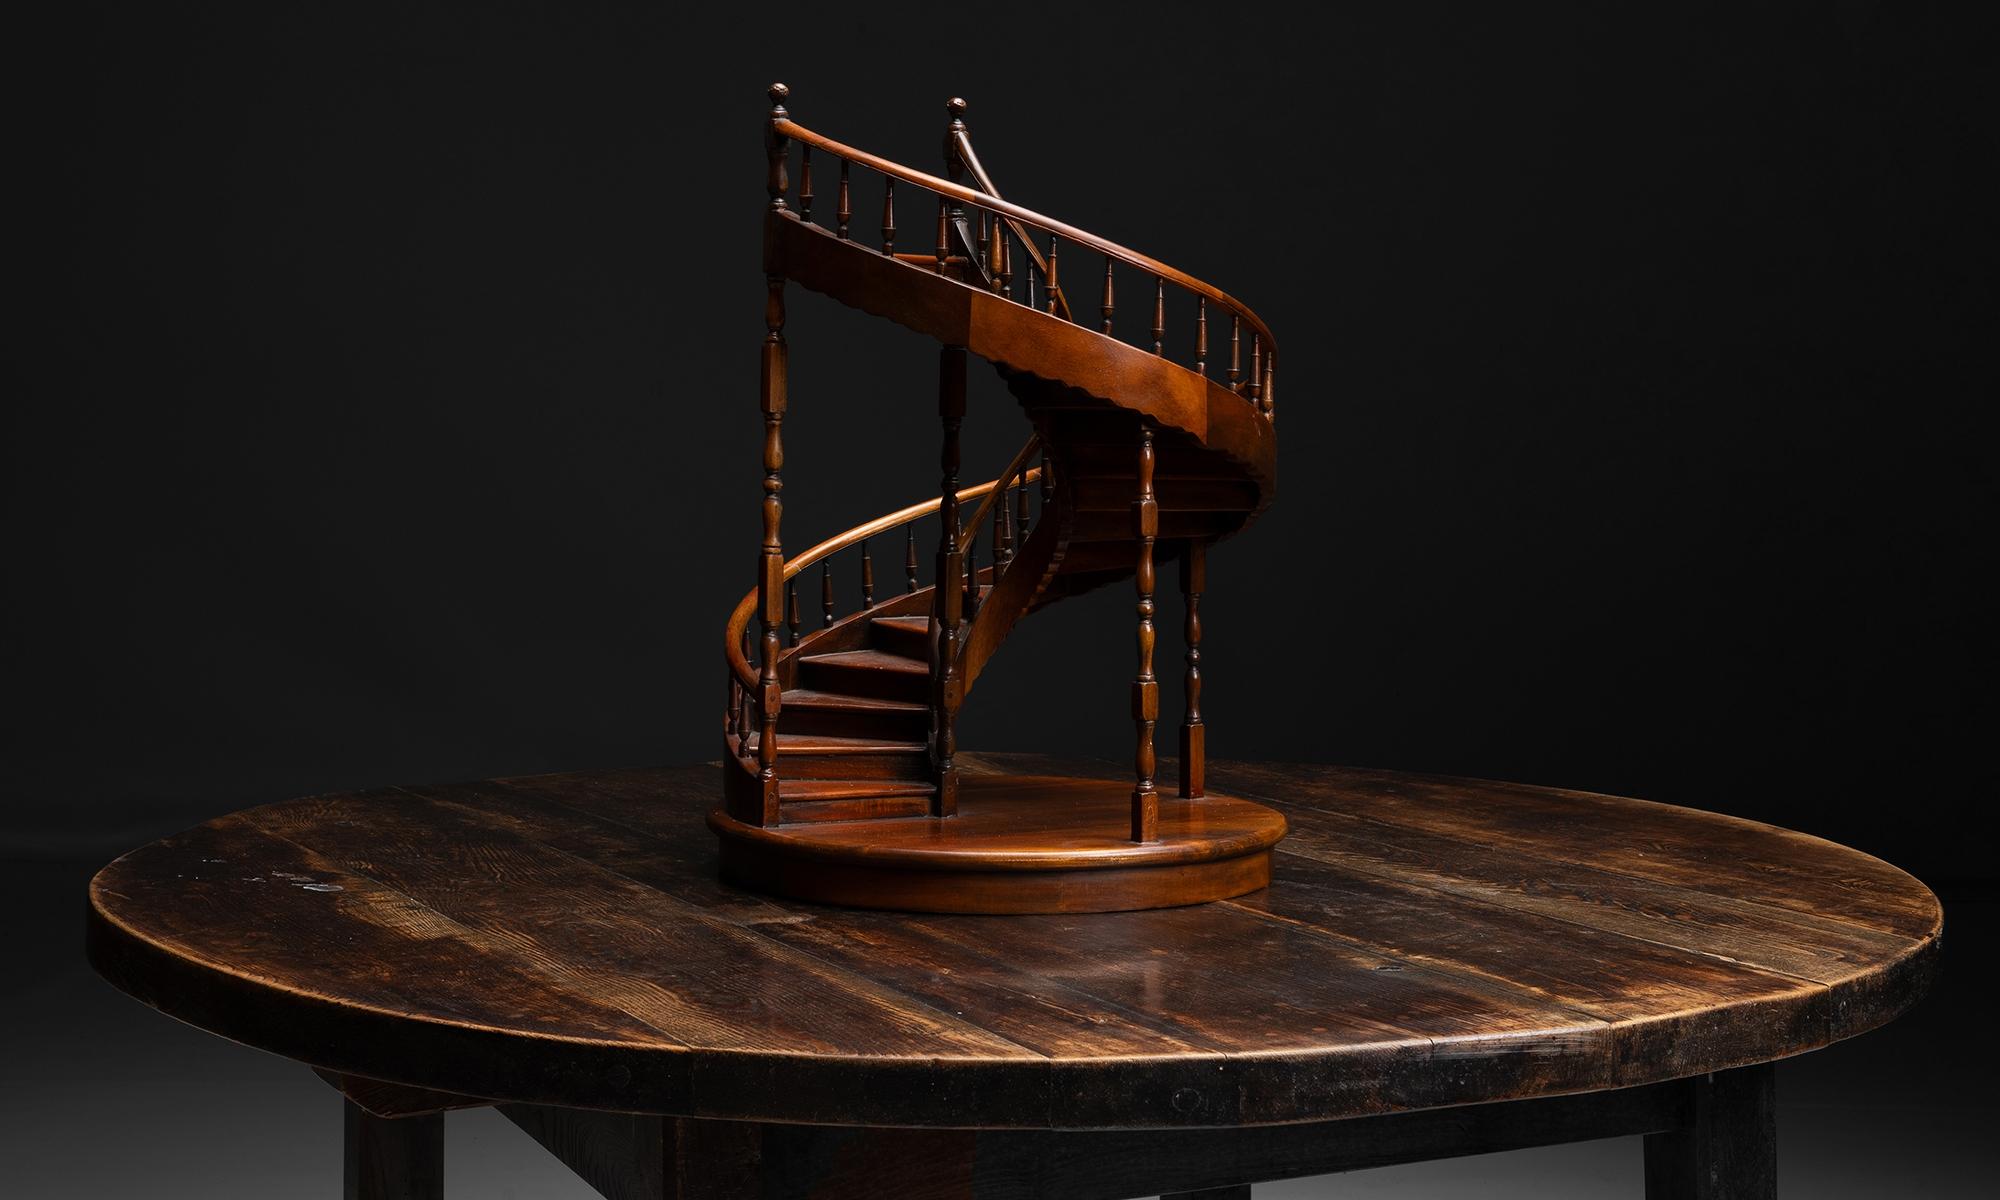 England circa 1890

Spiral apprentice staircase model constructed in mahiogany.

18.5”dia x 26”h